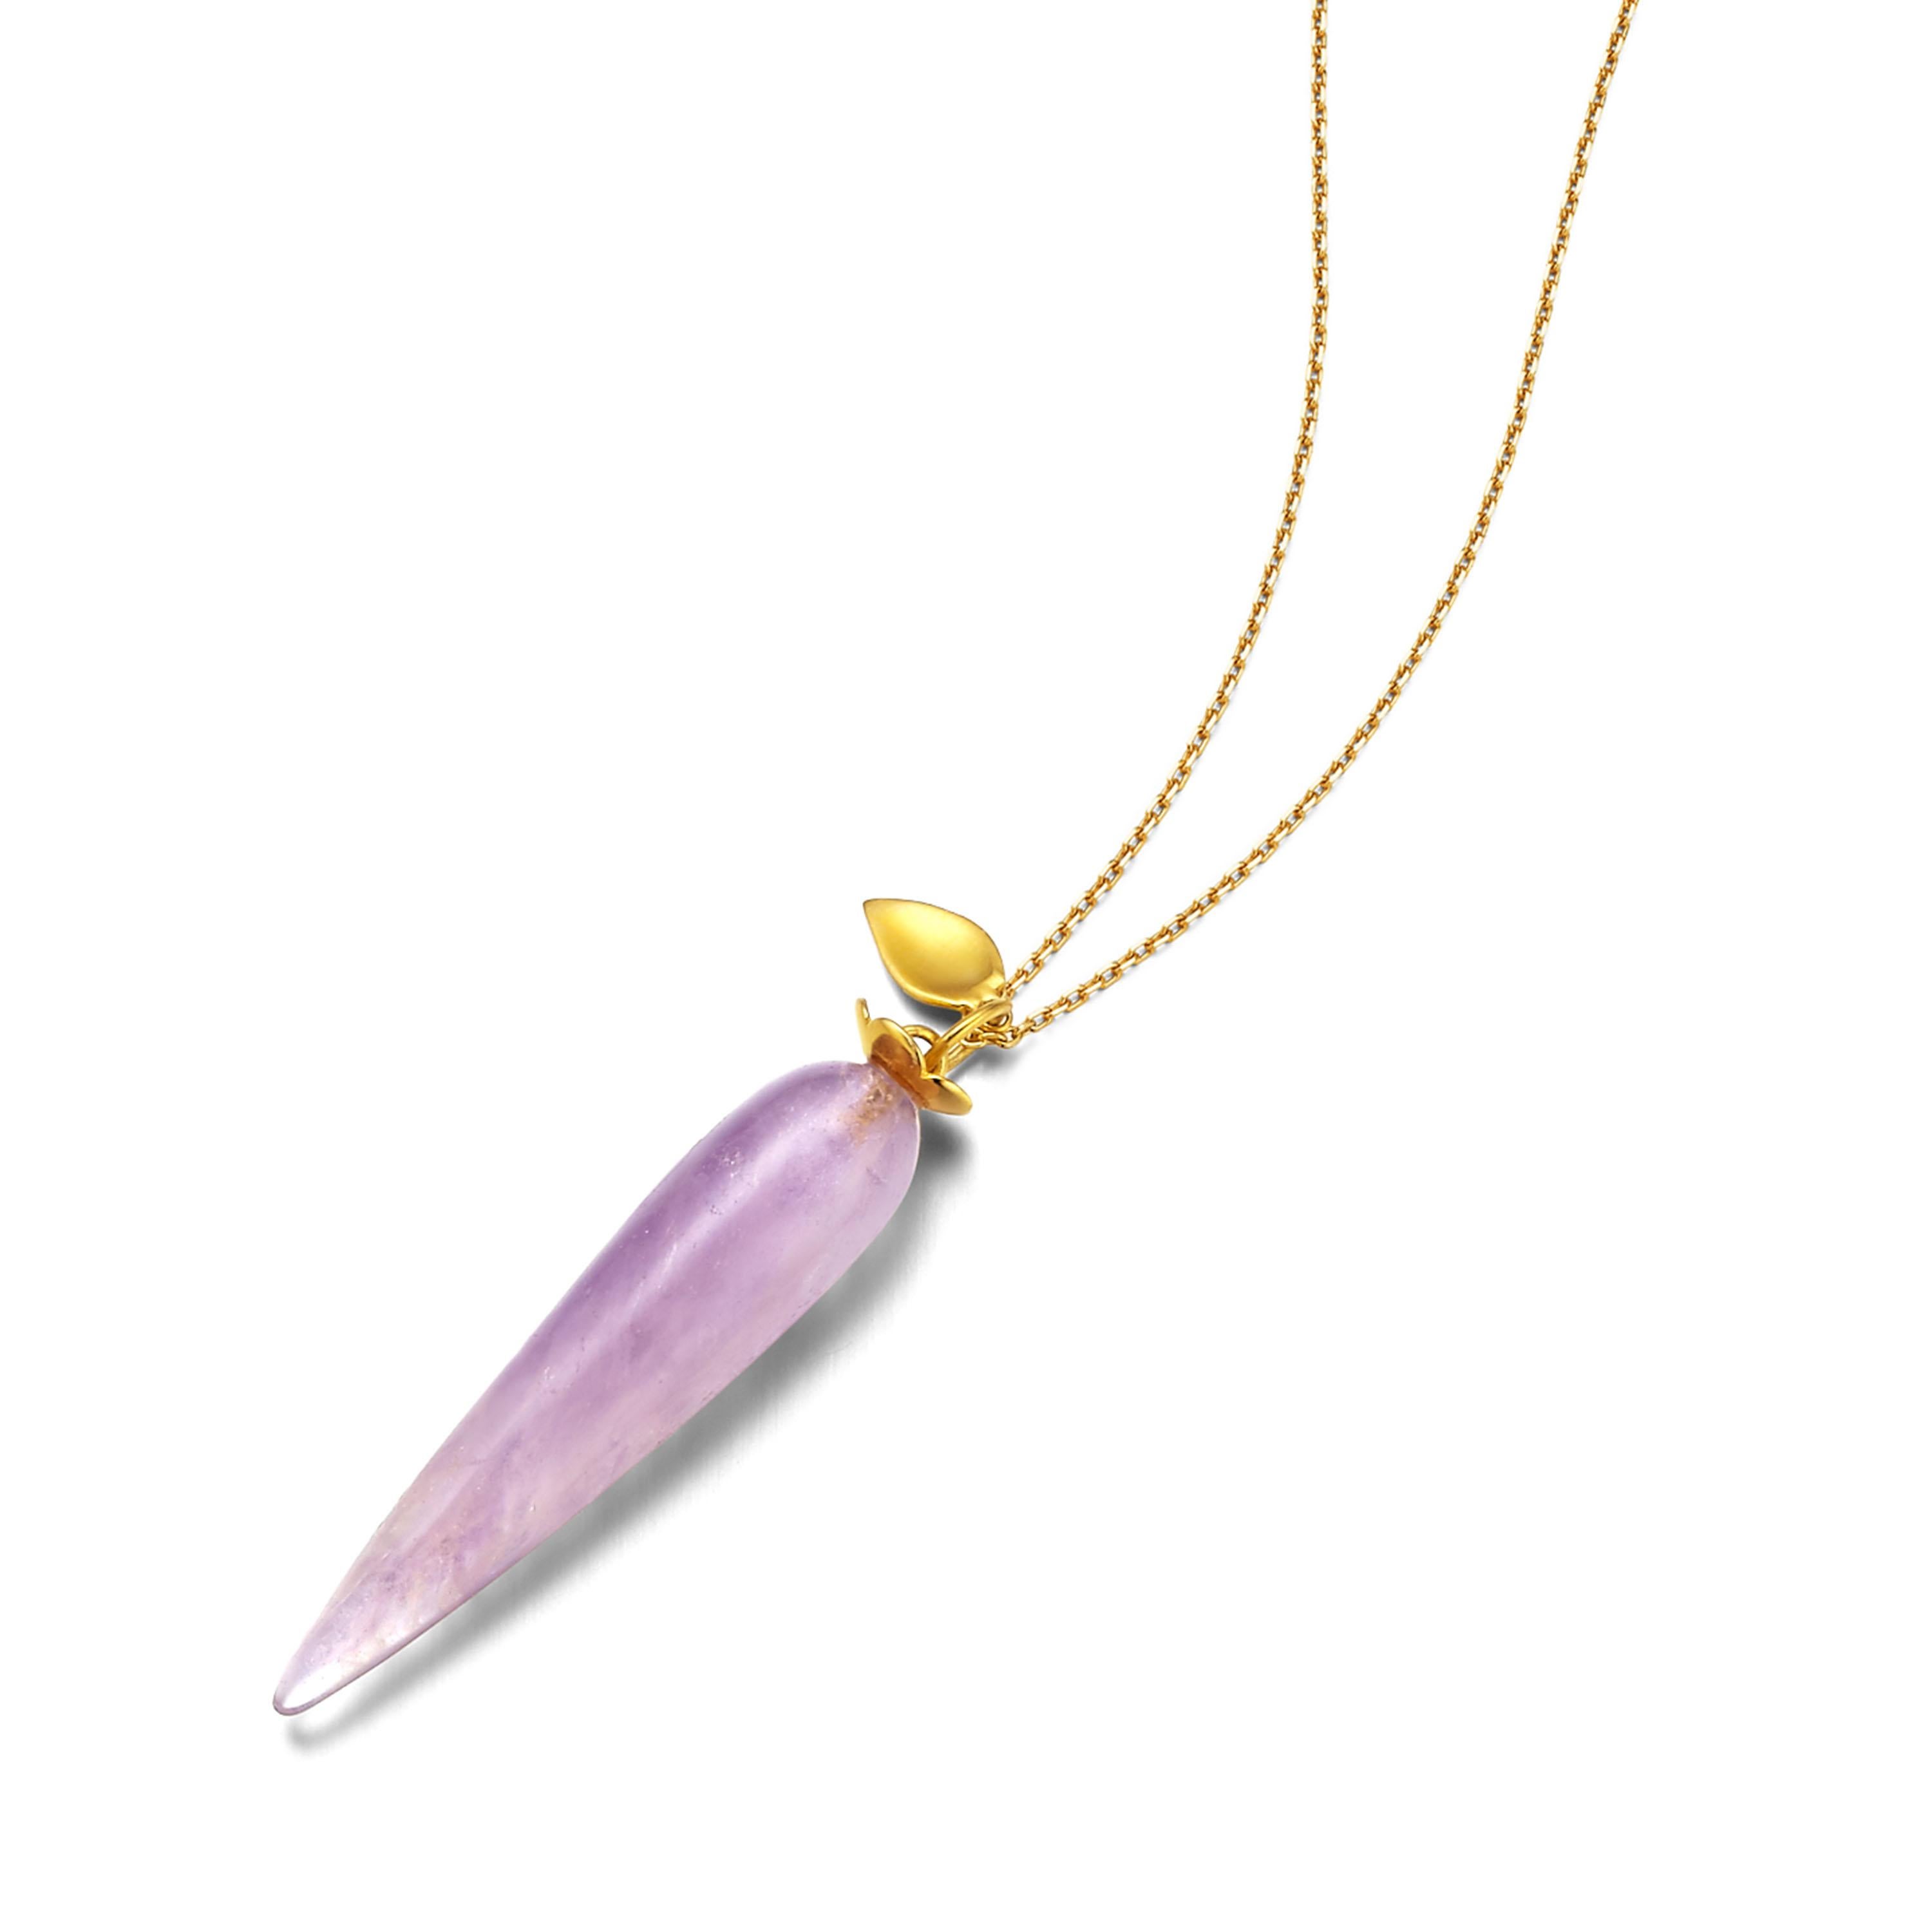 An elegant earrings and necklace set featuring teardrop purple amethyst, adorned with delicate petals of 18ct gold plate on sterling silver.

- Size (LxW): earrings = 51mm x 9mm, pendant = 45mm x 9mm
- Weight: per earring = 5.2gm, pendant = 5.7gm
-